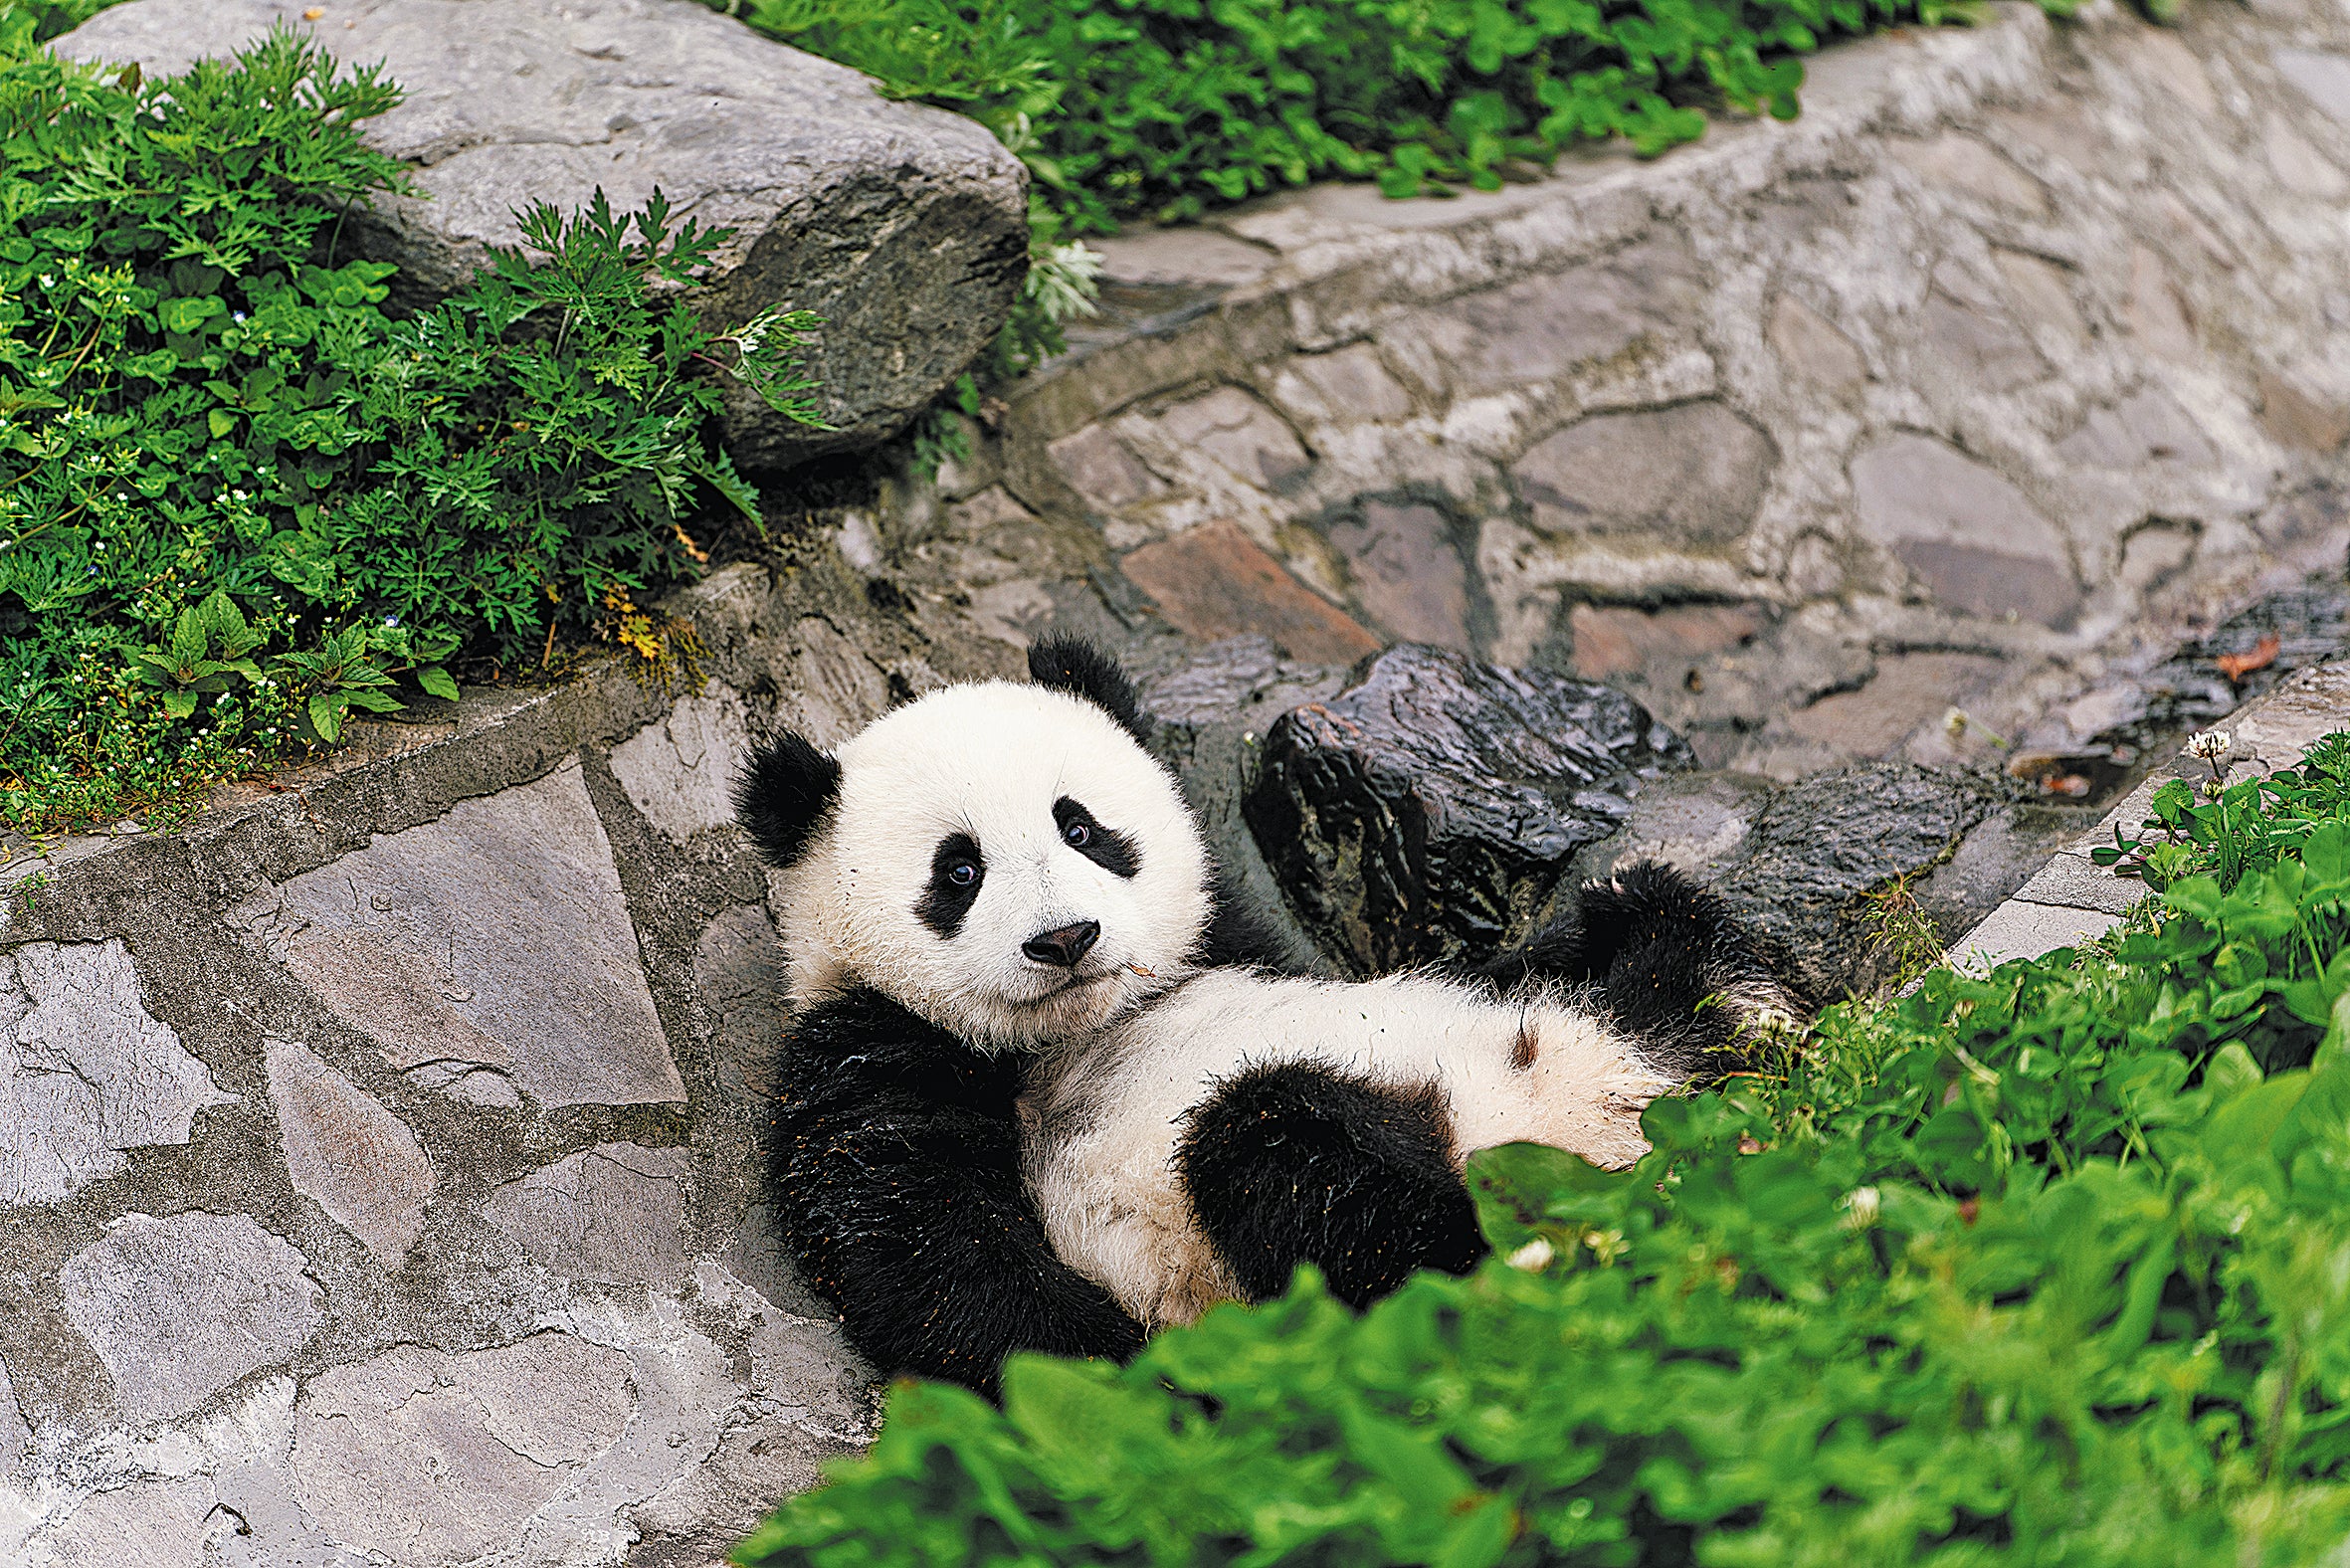 Documentary reveals pandas' problems | The Independent